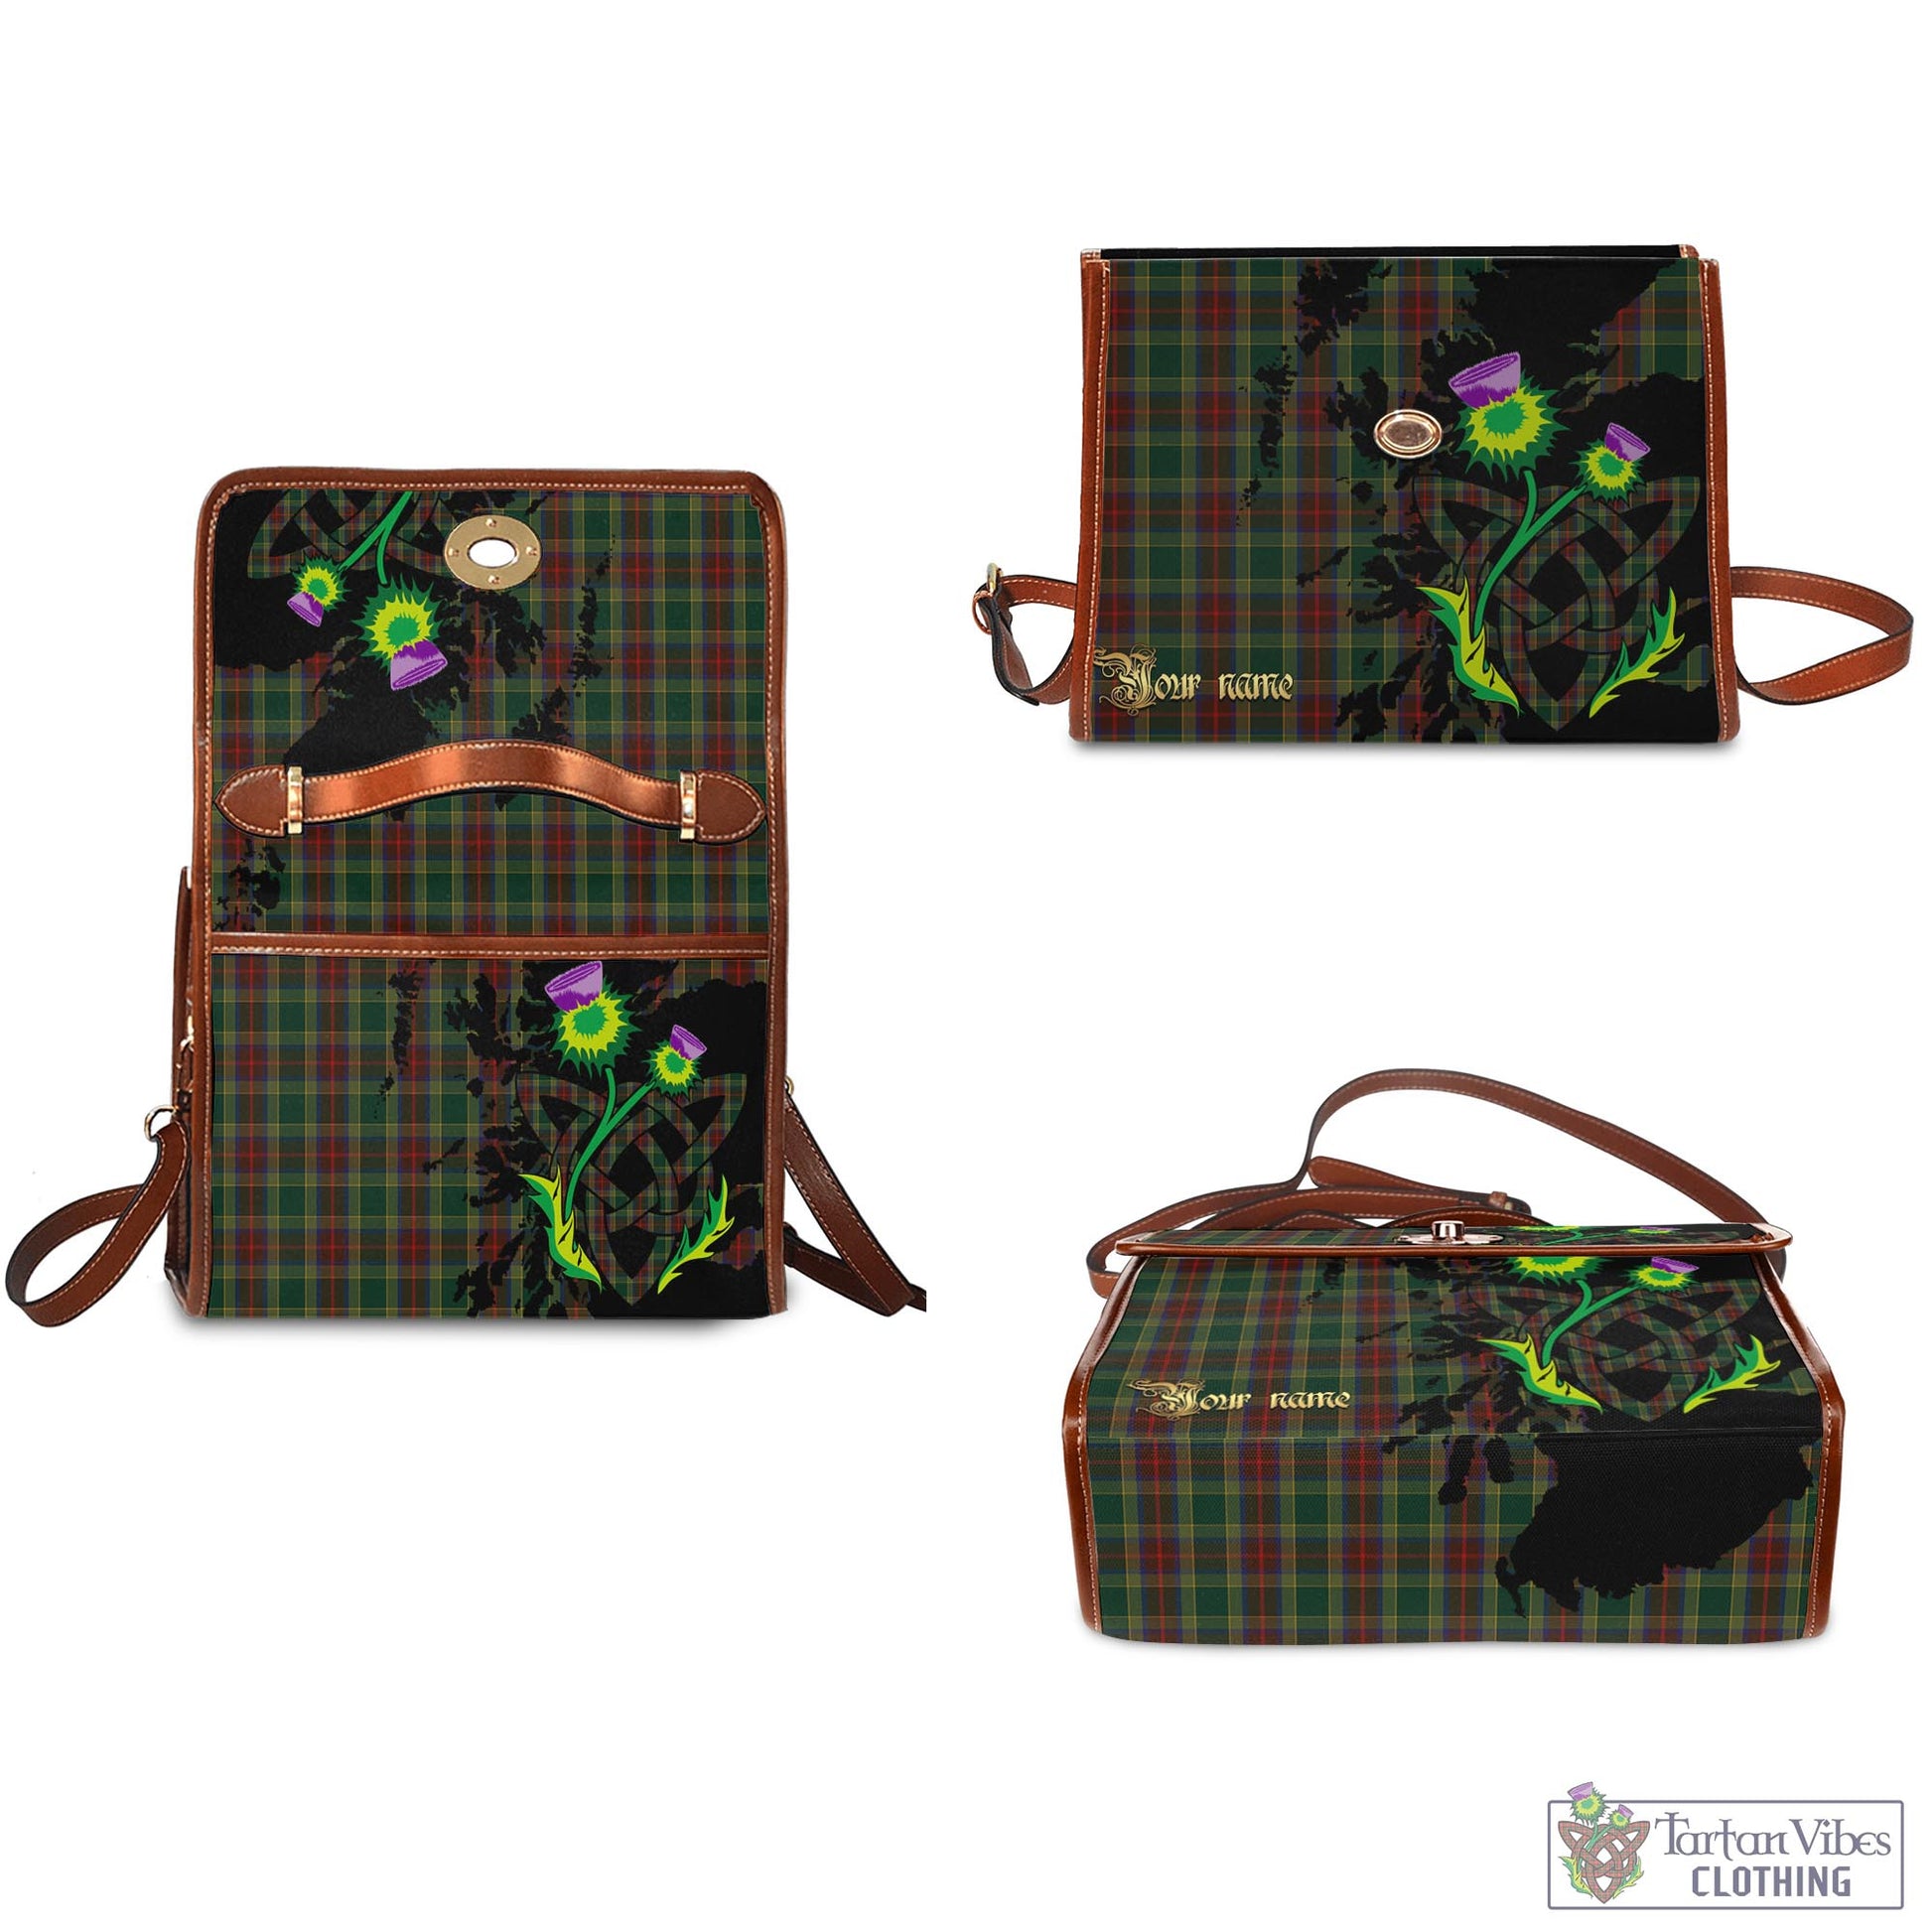 Tartan Vibes Clothing Waterford County Ireland Tartan Waterproof Canvas Bag with Scotland Map and Thistle Celtic Accents